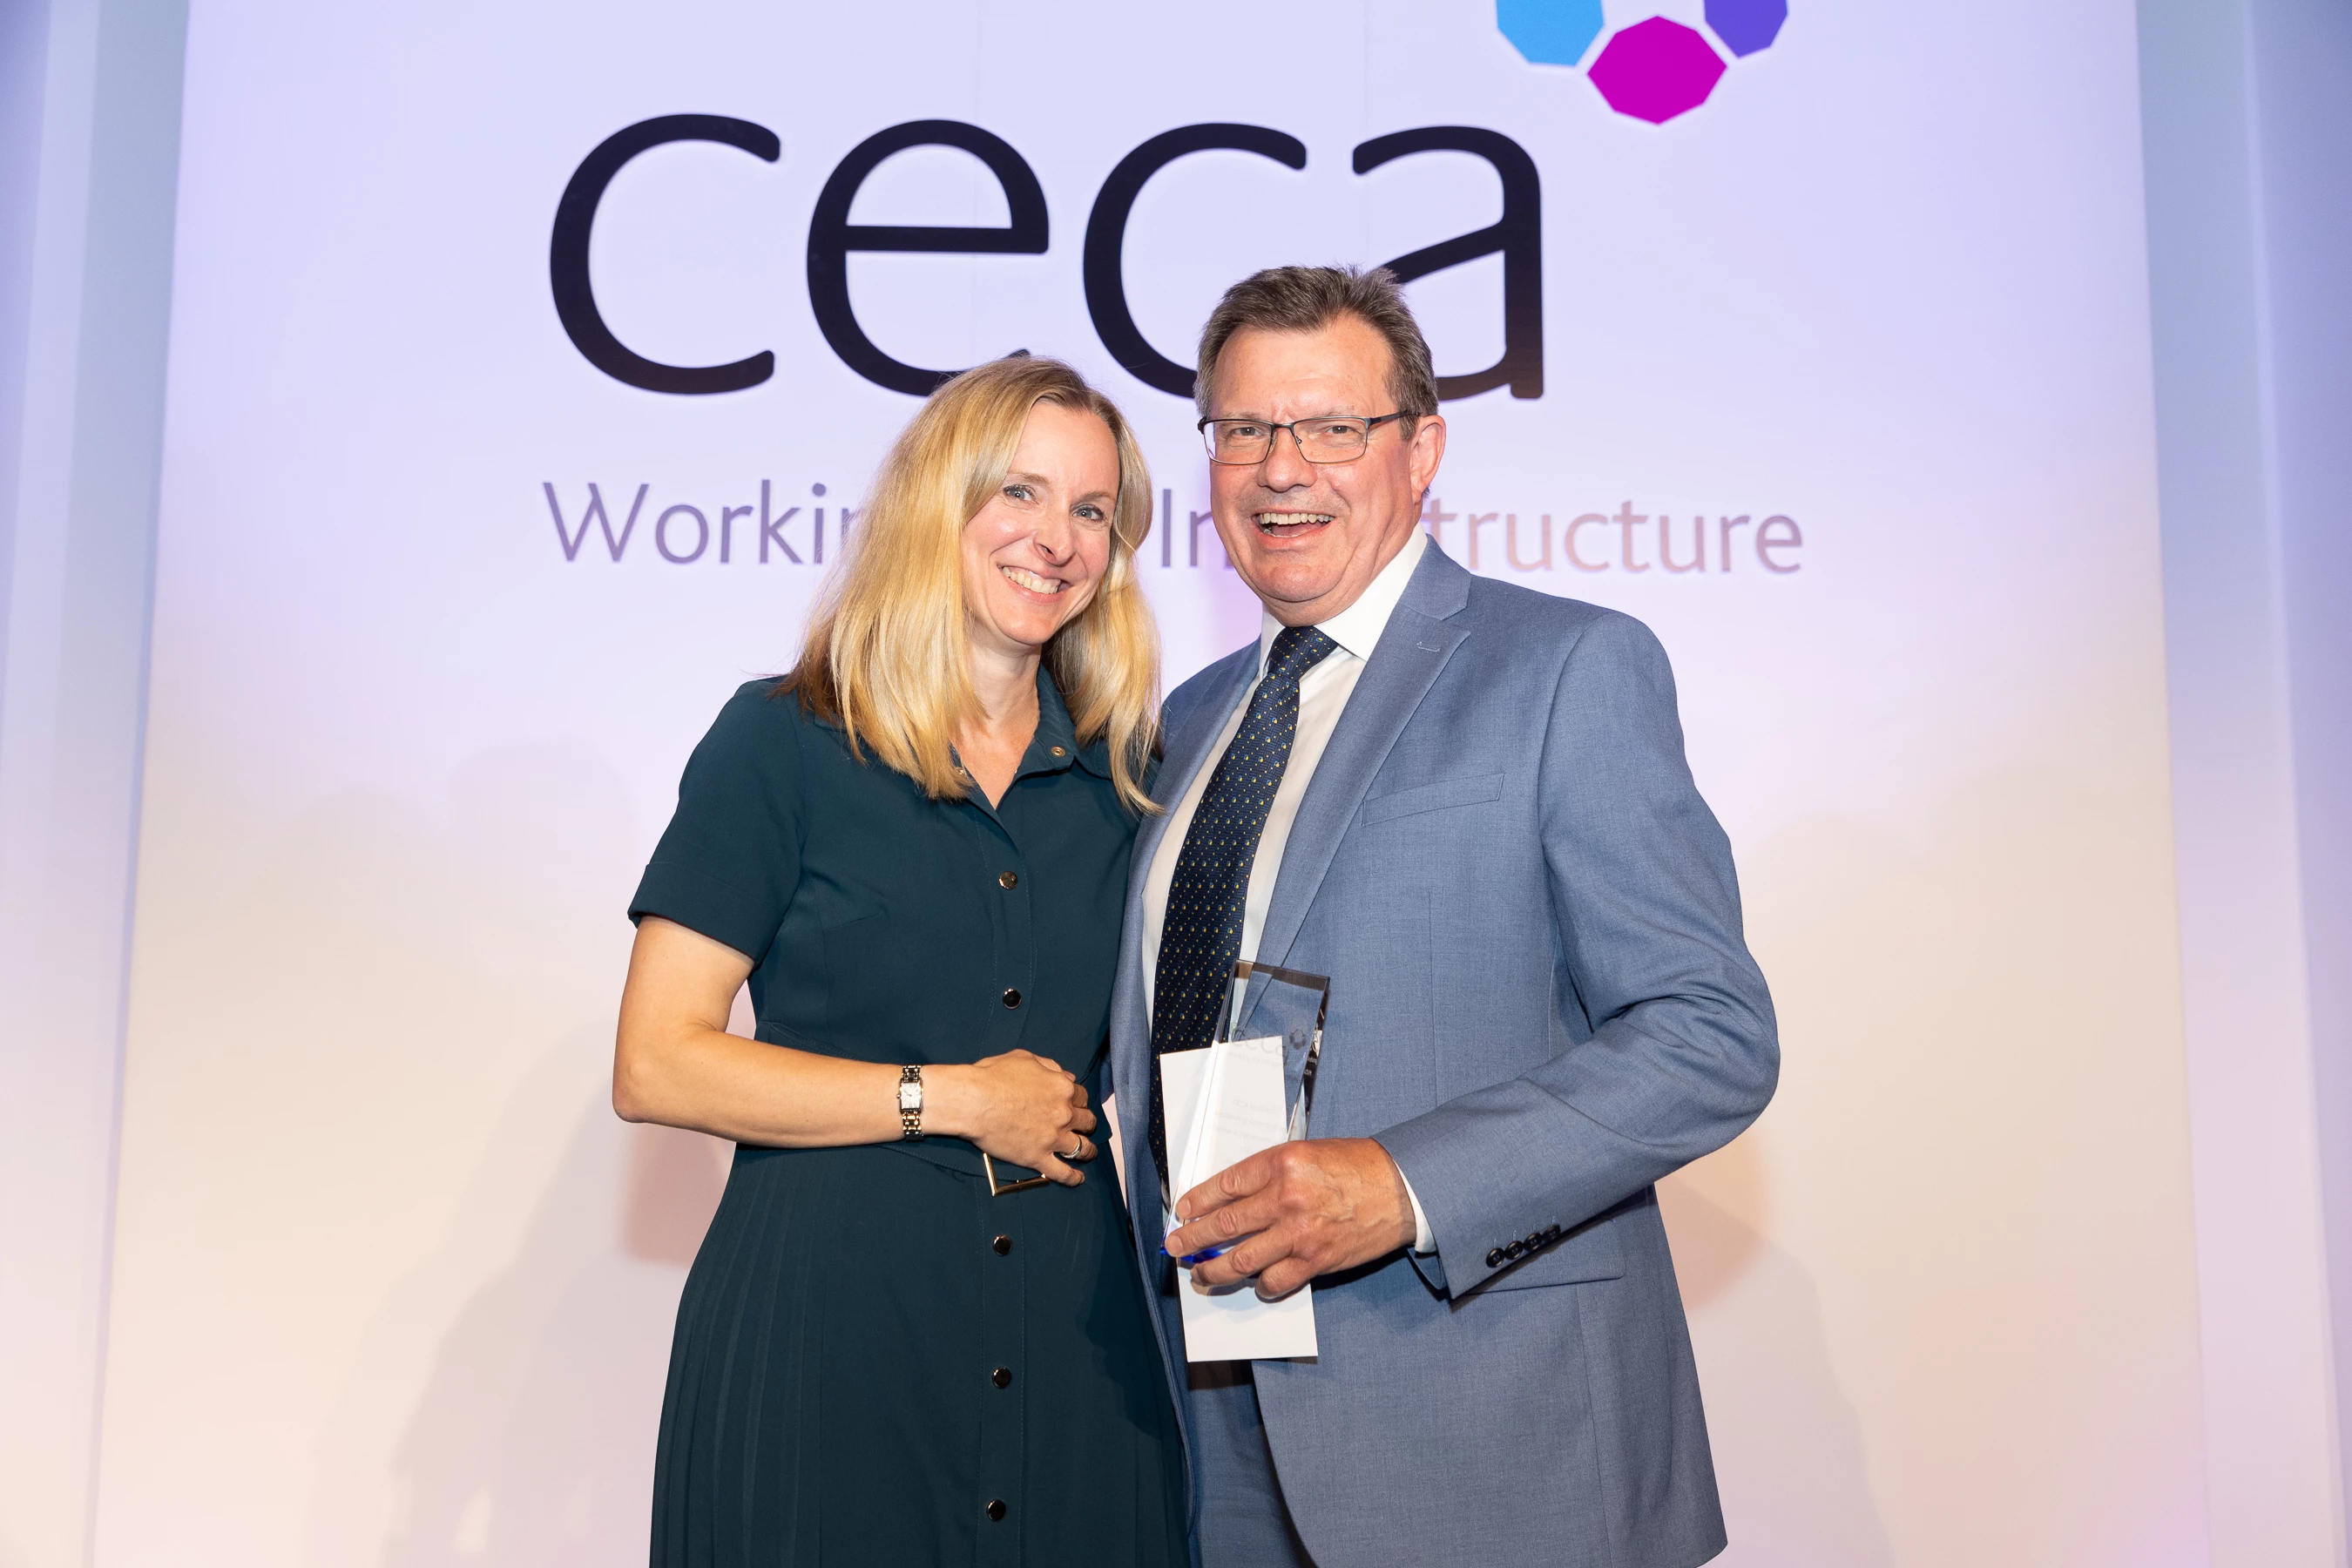 CECA Southern Chair, Samantha Barratt, presenting the award to Andy Flowerday